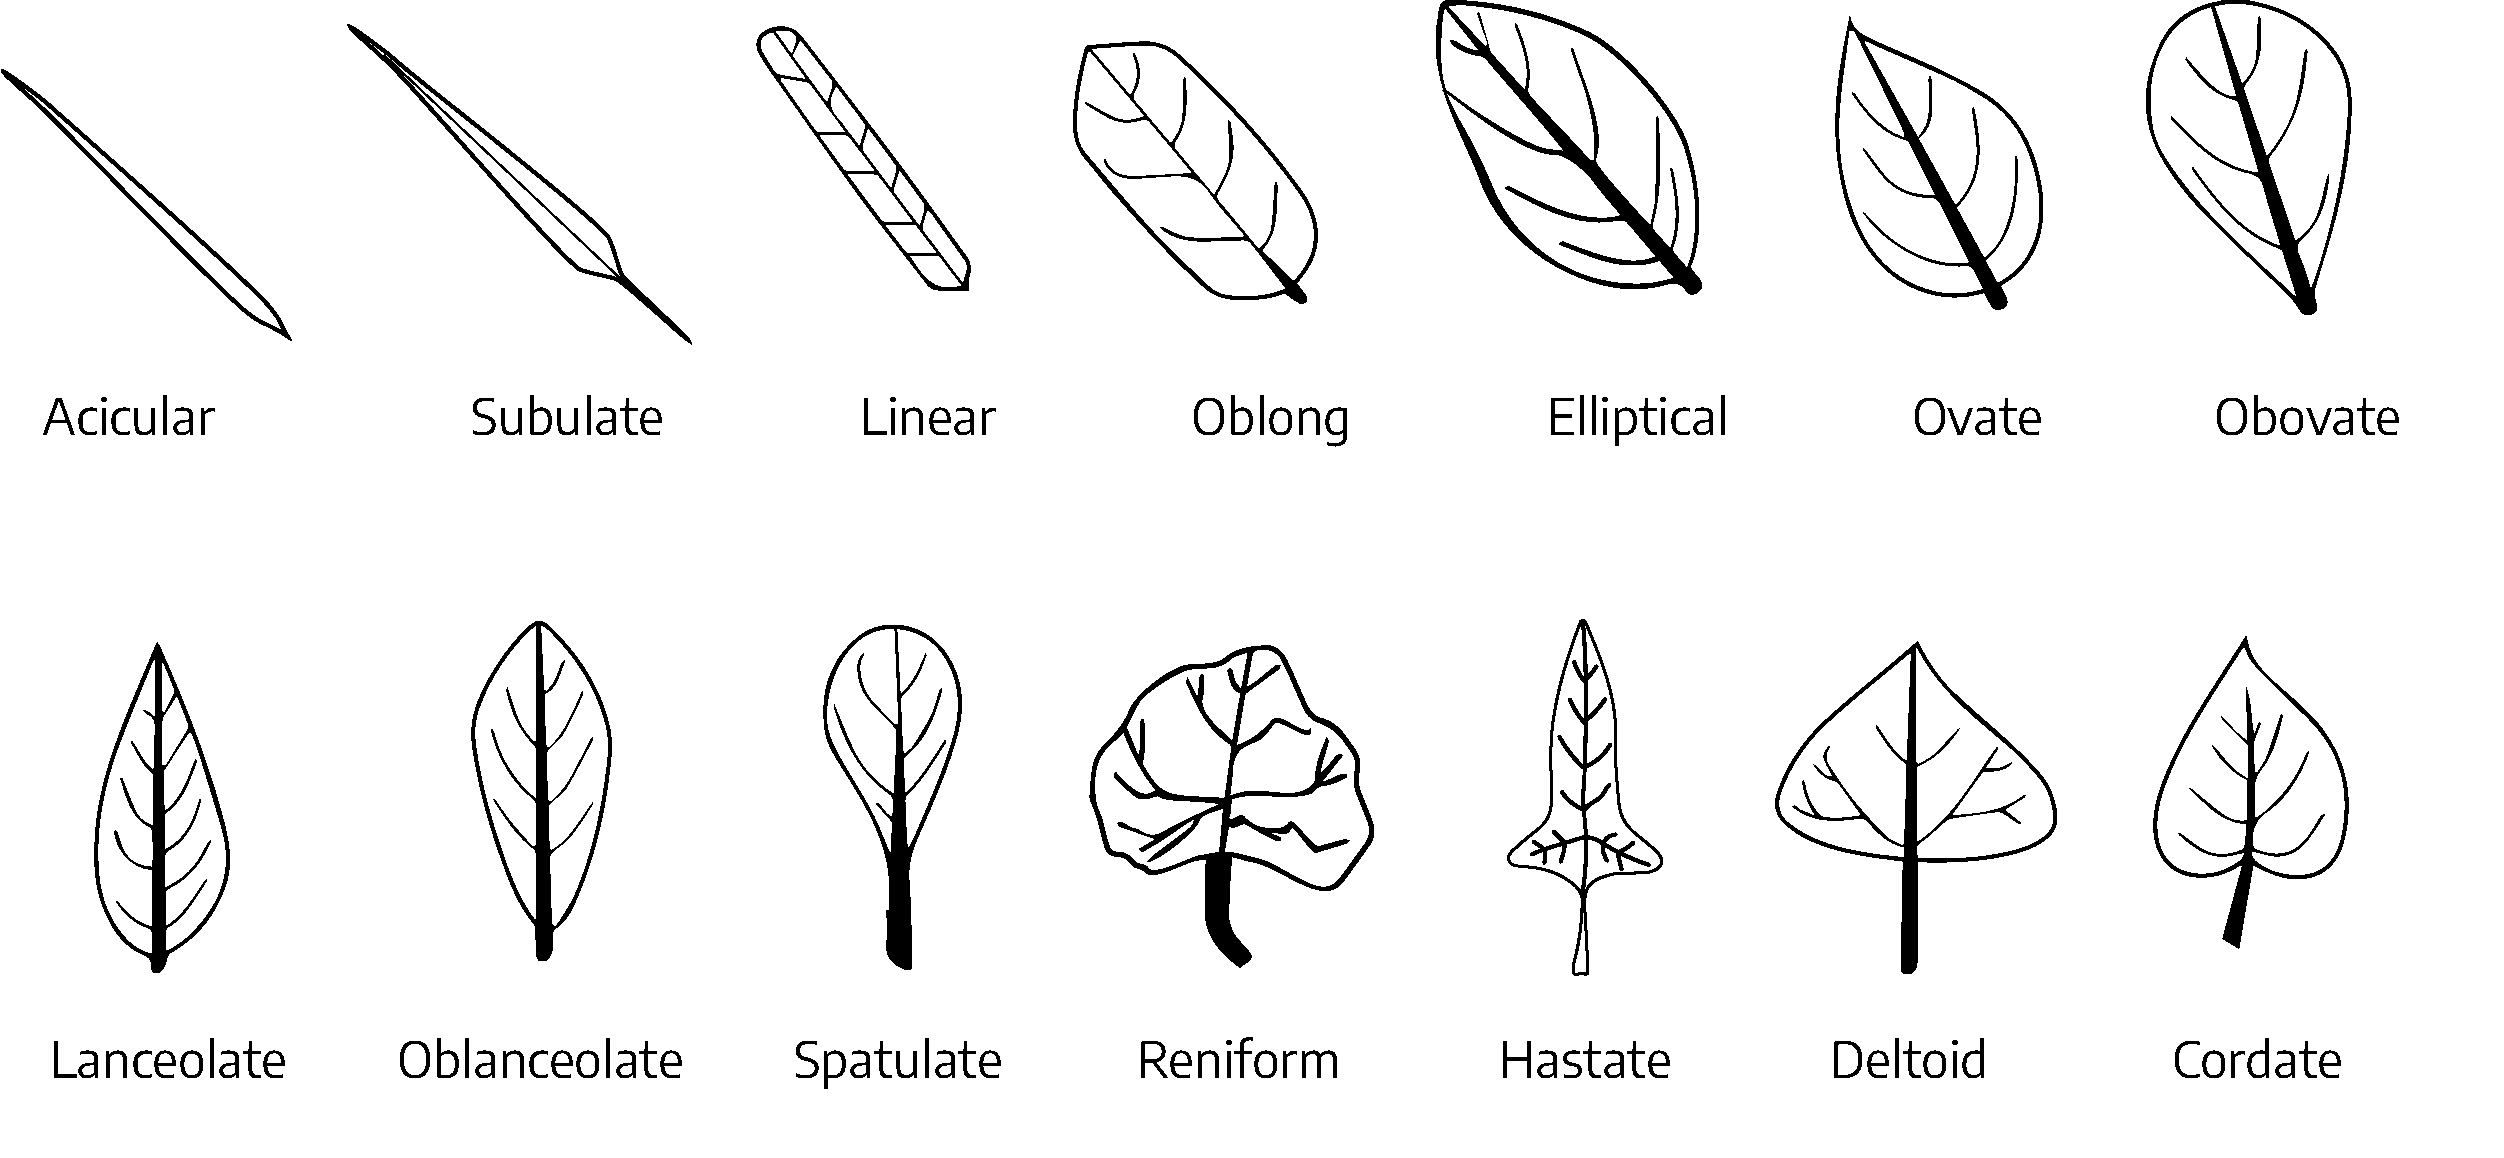 There are 14 examples of leaf blade shapes. The first leaf is an elongated needle-shape, acicular. The second leaf is wider needle shape, subulate. The third is a wider, relatively straight shape, linear. The fourth is wider at the base and oval shaped, that graduates to a point, oblong. The fifth is a wider at the base and gradually comes to a dull point, elliptical. The sixth is a teardrop shape with a wide base and point at the top, ovate. The seventh is a teardrop shape with the point at the base and wider at the top, obovate. The eighth is a thinner teardrop shape, wider at the bottom and graduates to a point at the top, lanceolate. The ninth is a rounded point at the base, widening to about 2/3 of the length then graduates to a rounded point at the top, oblanceolate. The tenth is a teardrop shape that is wider at the top and comes to a point about 2/3 of the way down the petiole, spatulate. Eleventh is a irregular, rounded shape with the petiole coming from the bottom, orbicular. The twelth is a diamond shape, rhomboidal. The thirteenth is a very wide, almost flat, base that starts about half way up the petiole, widening out and coming back to a point at the top, delloid. The fourteenth is a heart shape with the two rounded areas as the base and coming to a point at the top, cordate.